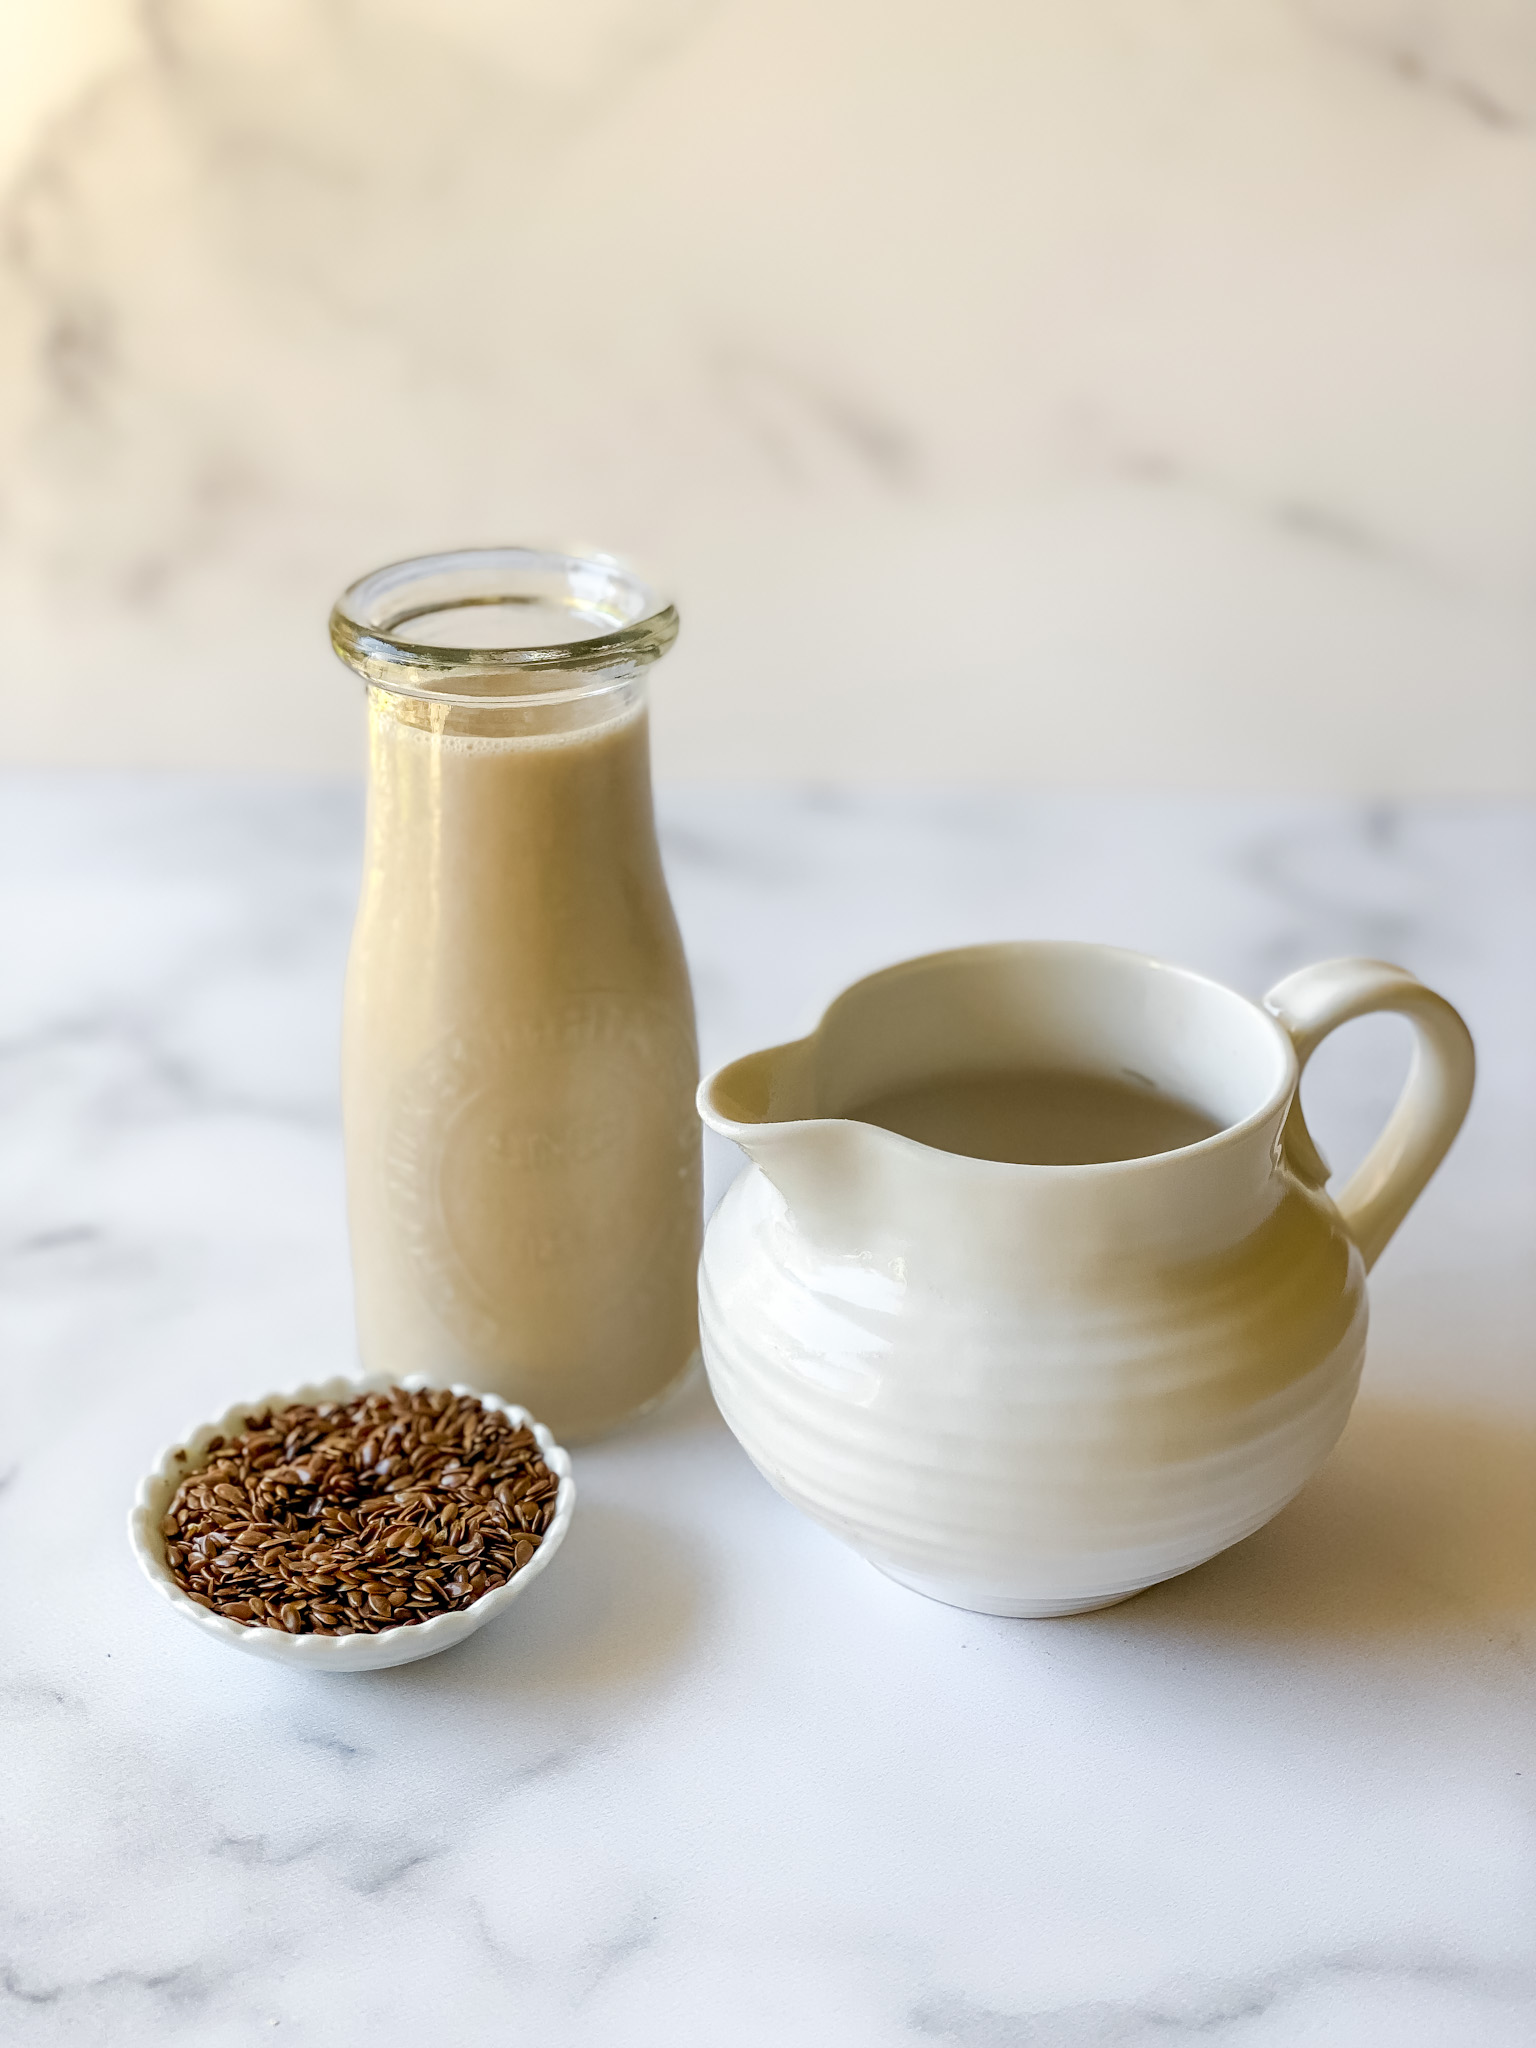 homemade flax milk in jug and creamer plus dish of flax seeds